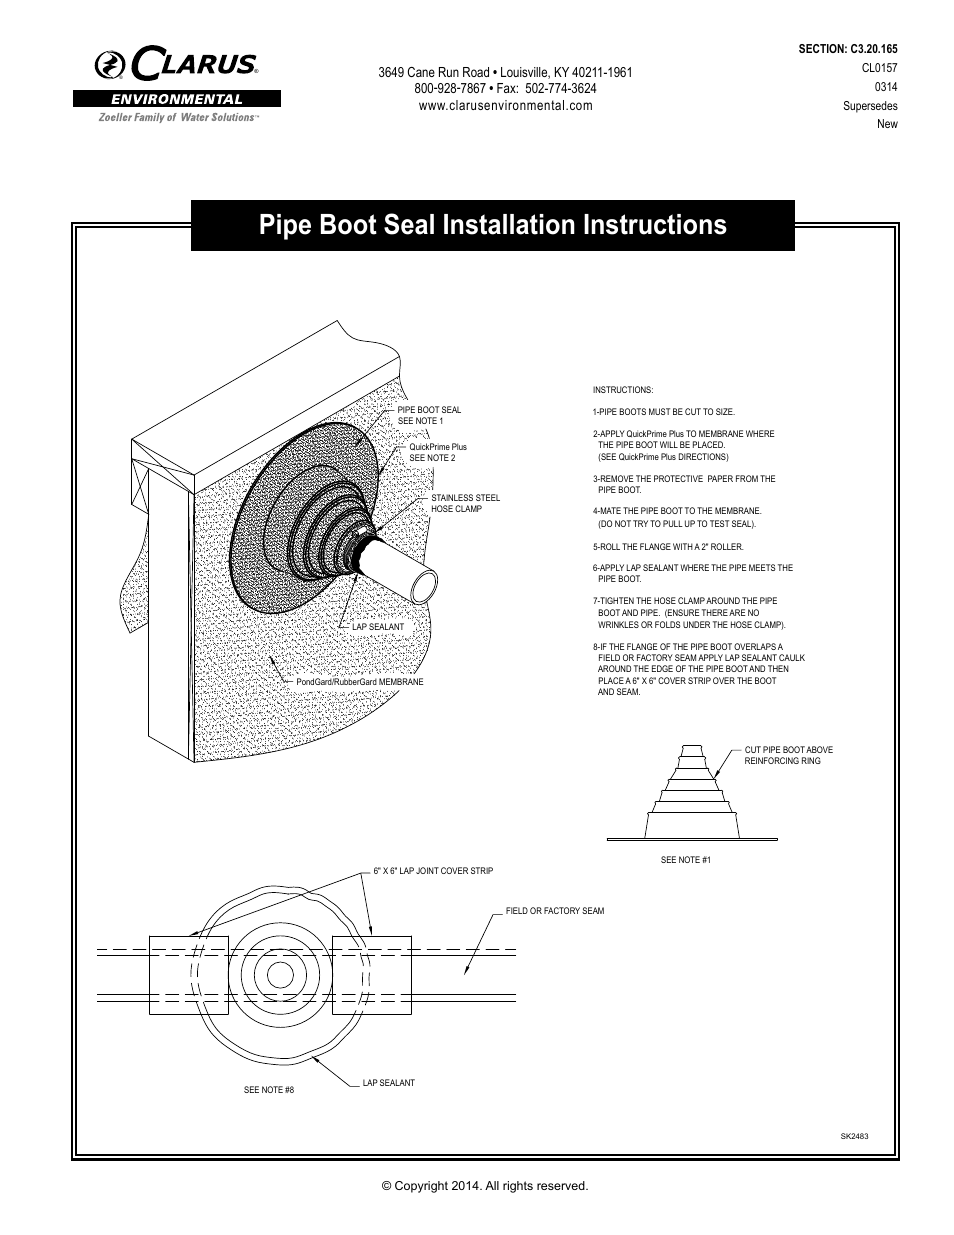 Pipe Boot Seal